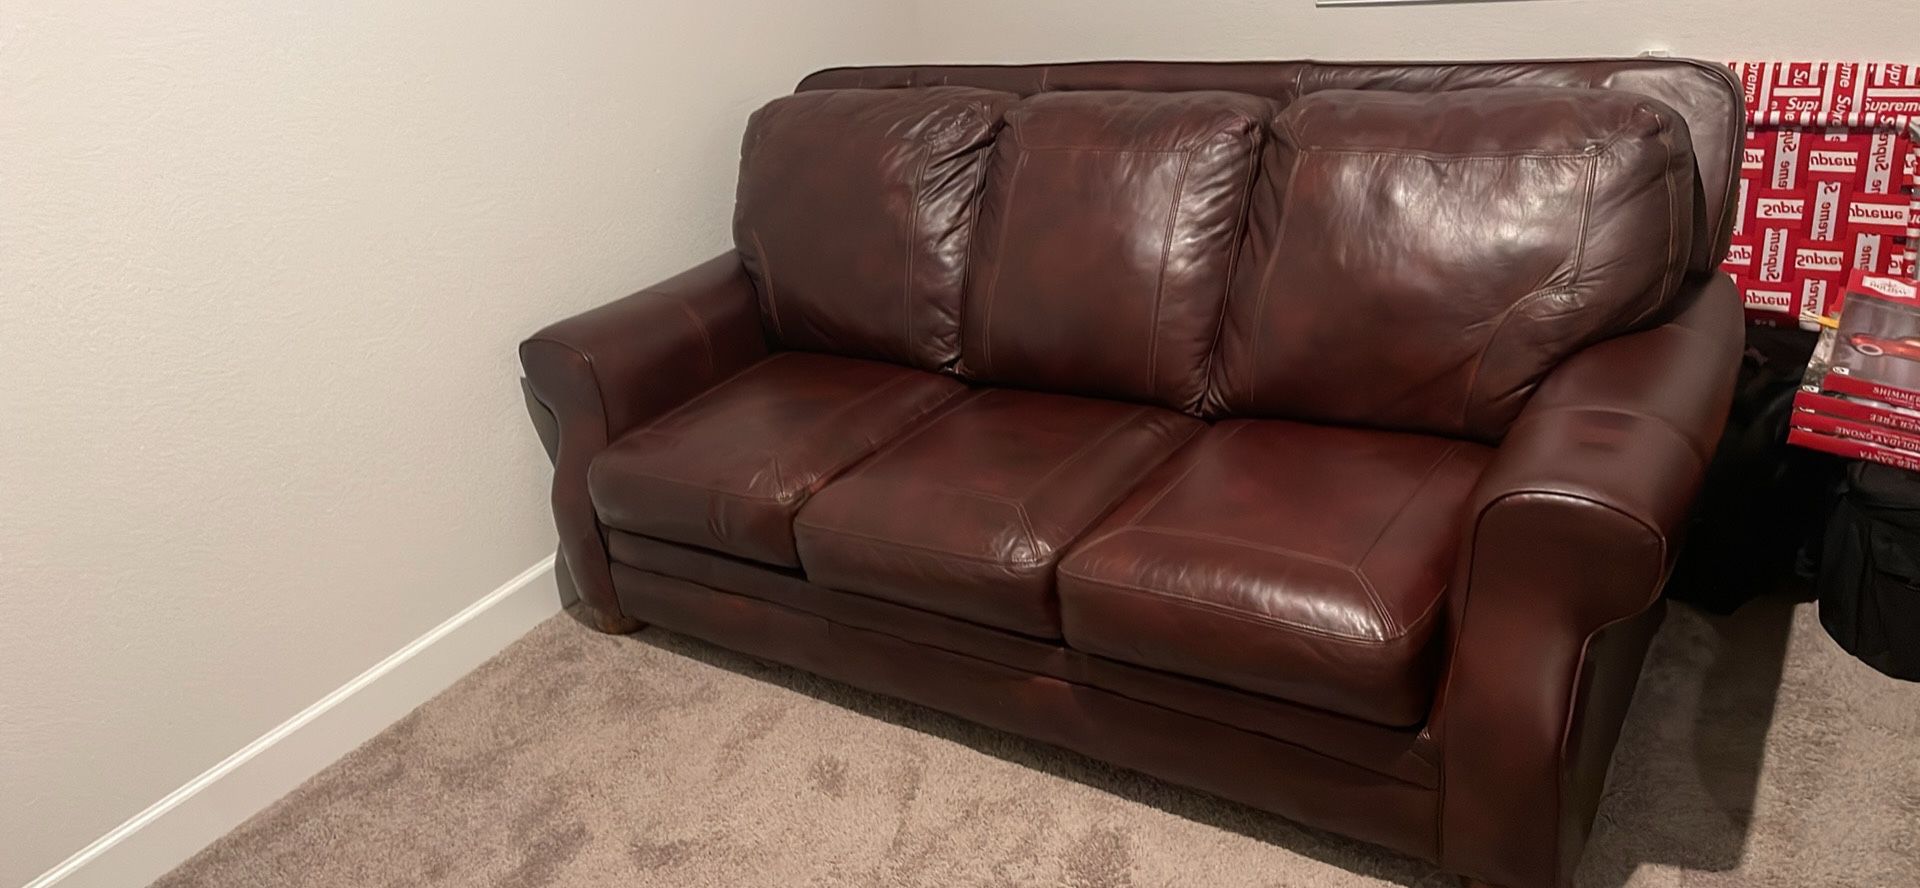 Ashley leather couch